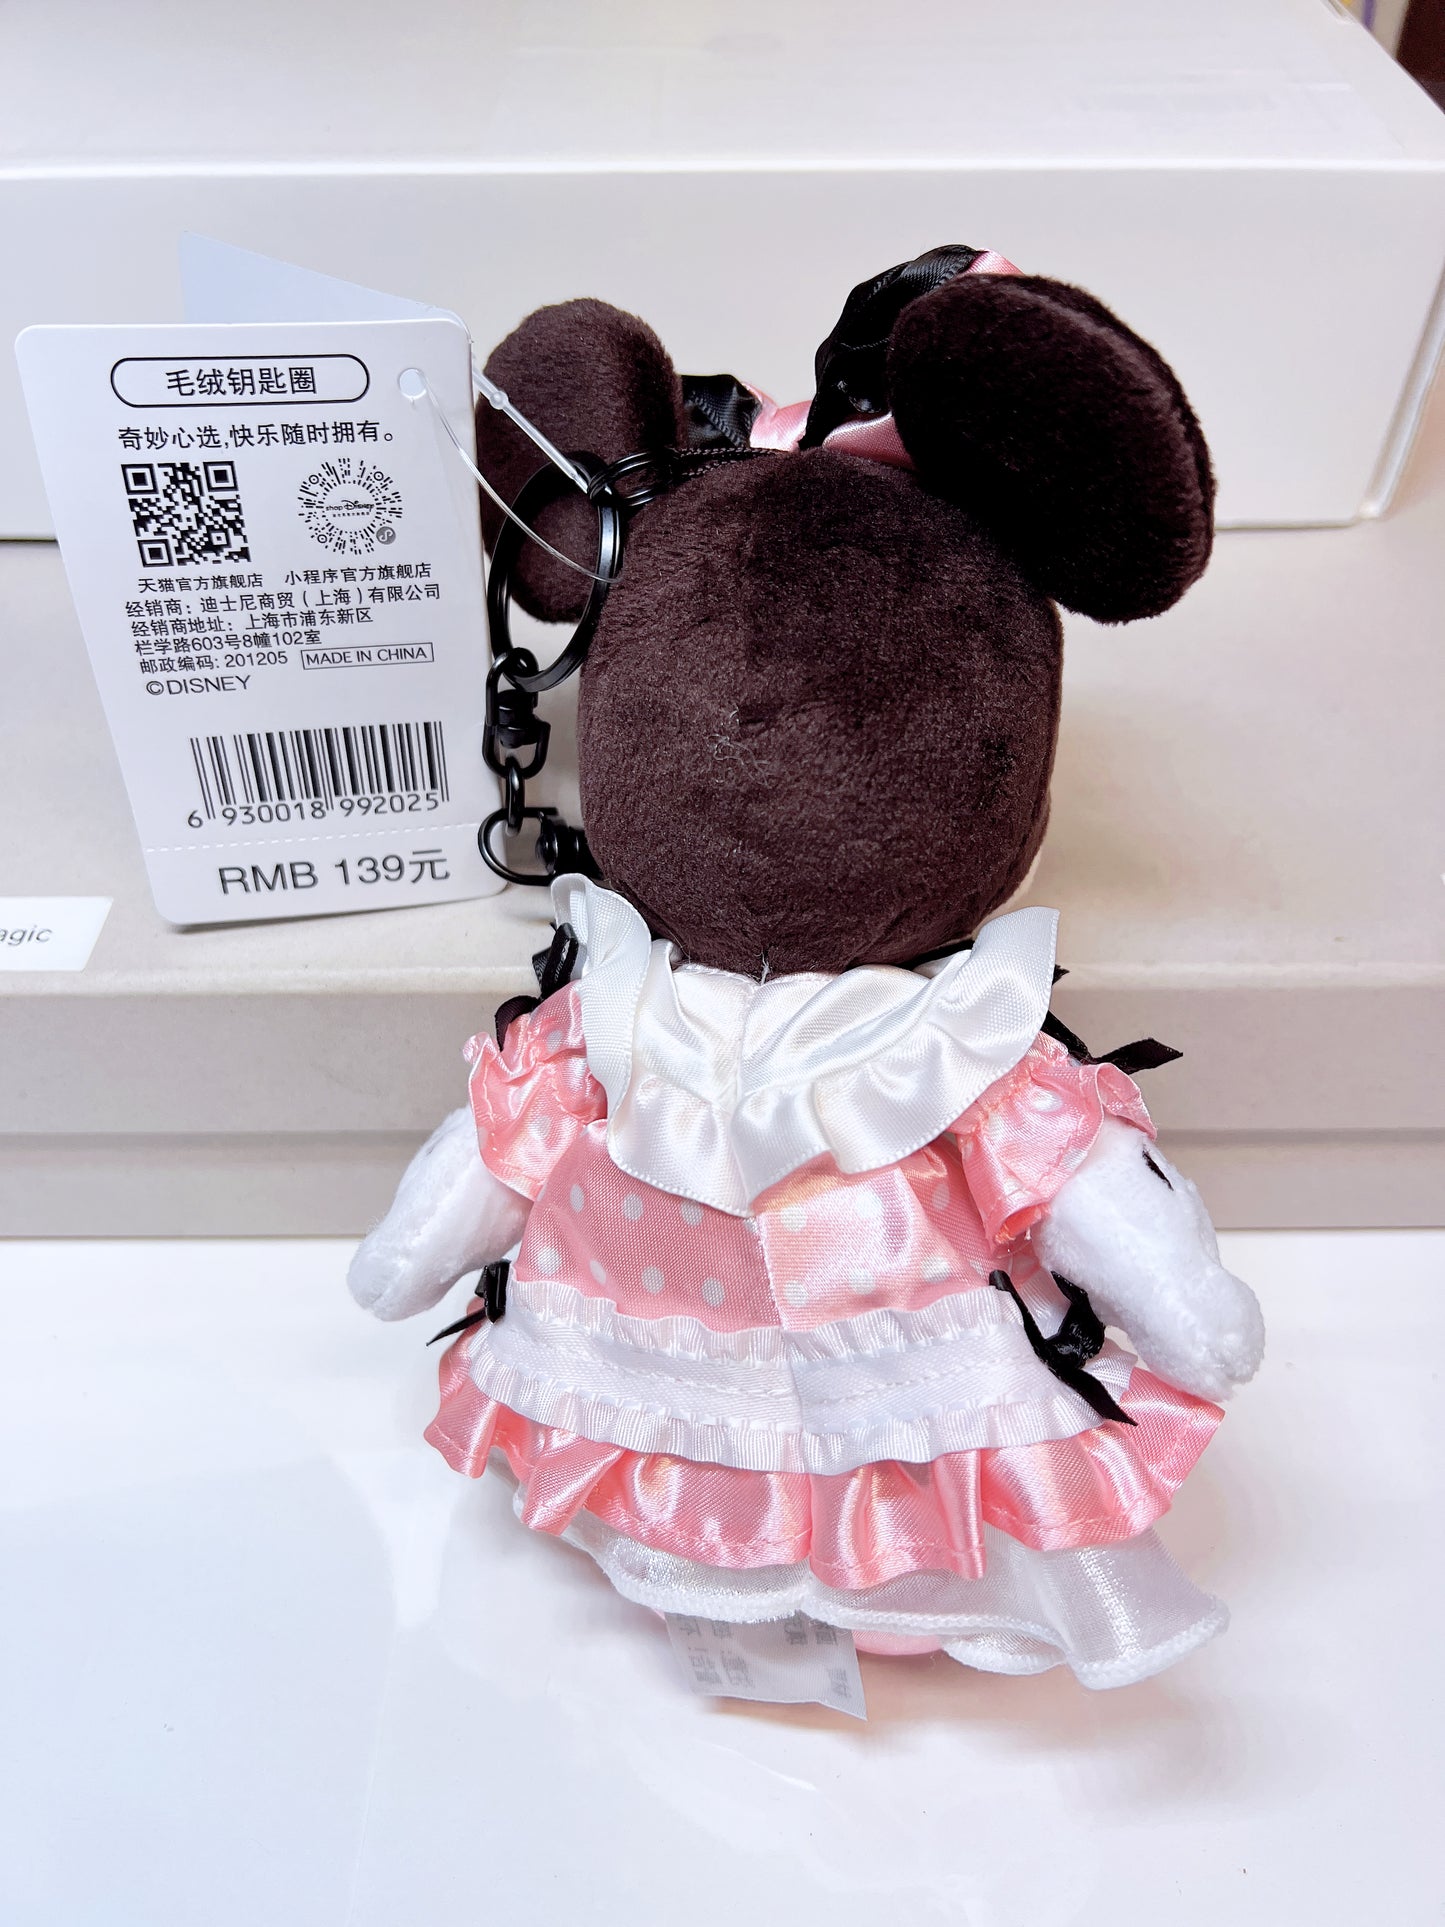 2024 Minnie new release pink dress plush keychain BNWT
 available on hand